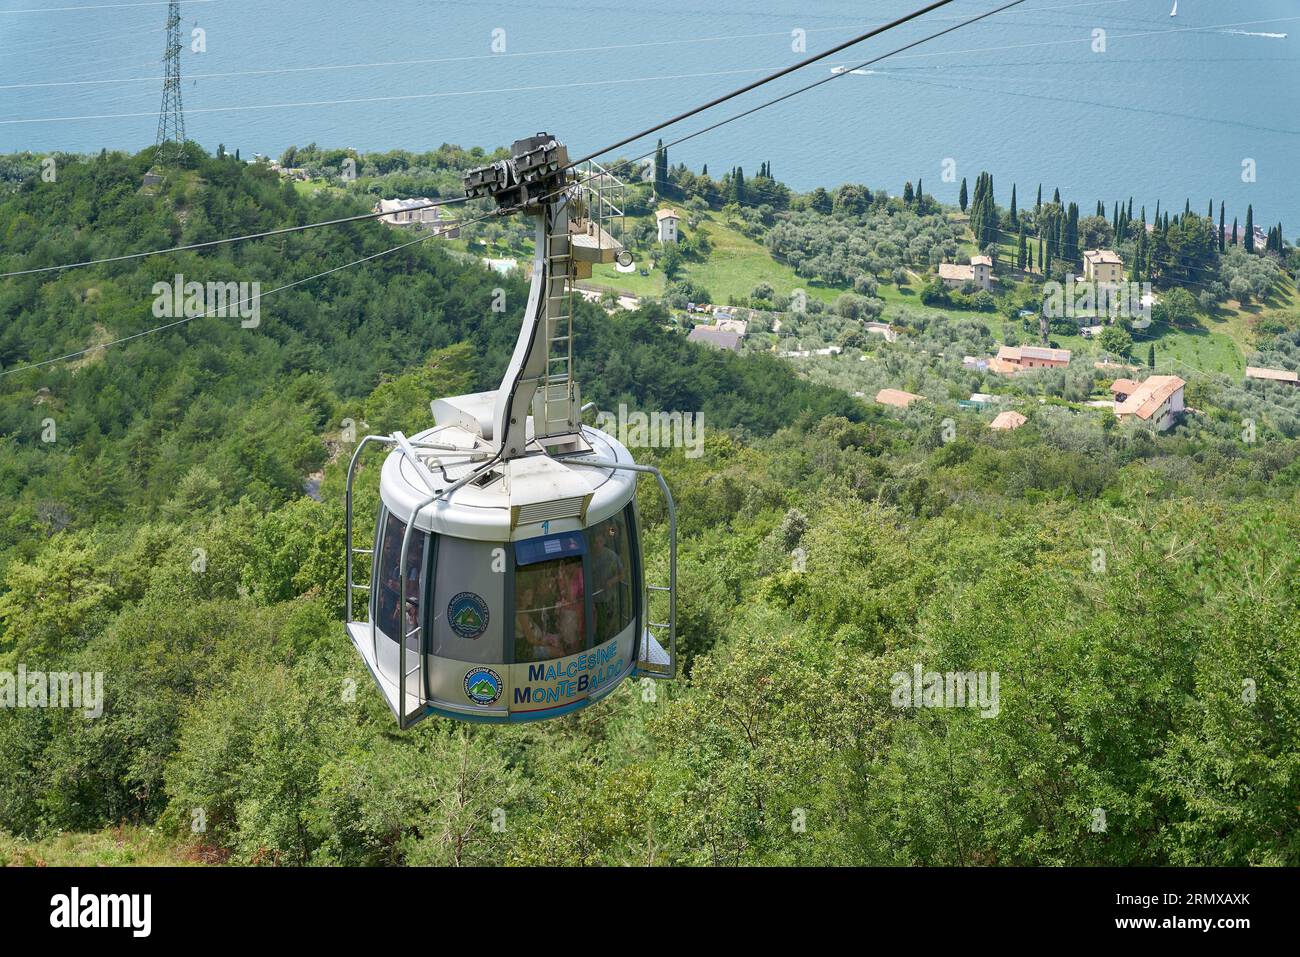 Funivia cable car gondola on the way from Malcesine on Lake Garda to the top of Monte Baldo mountain in Italy Stock Photo